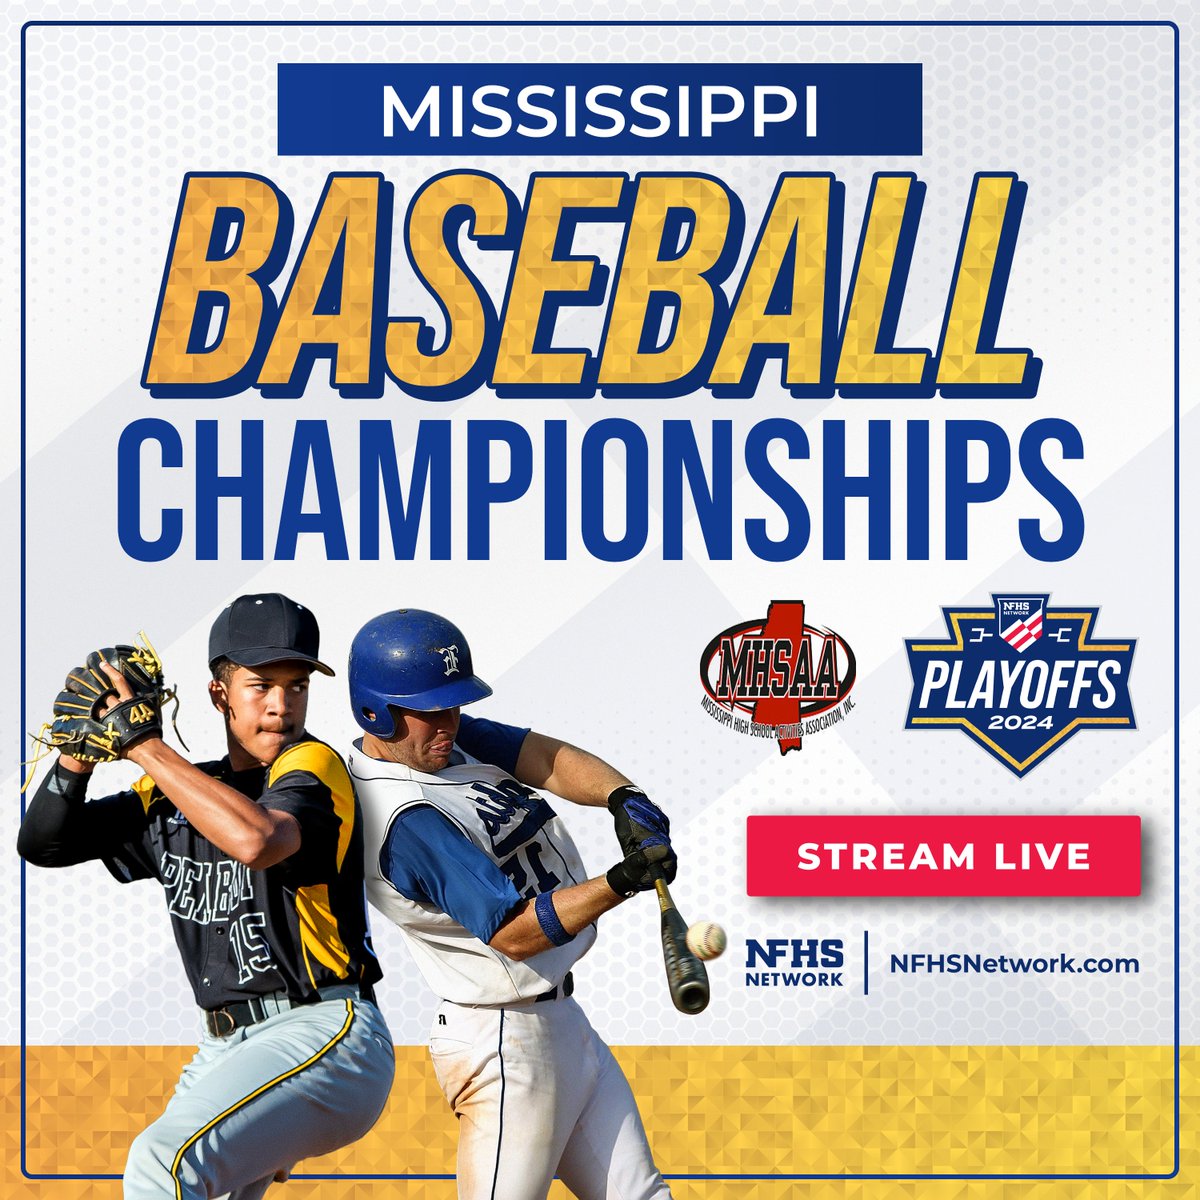 @misshsaa Can't make it out in person today? Cheer on your team in the 2024 MHSAA Baseball Championships on the #NFHSNetwork 🏆 Watch every inning unfold via the OFFICIAL streaming link: bit.ly/3QpAiFH ✅